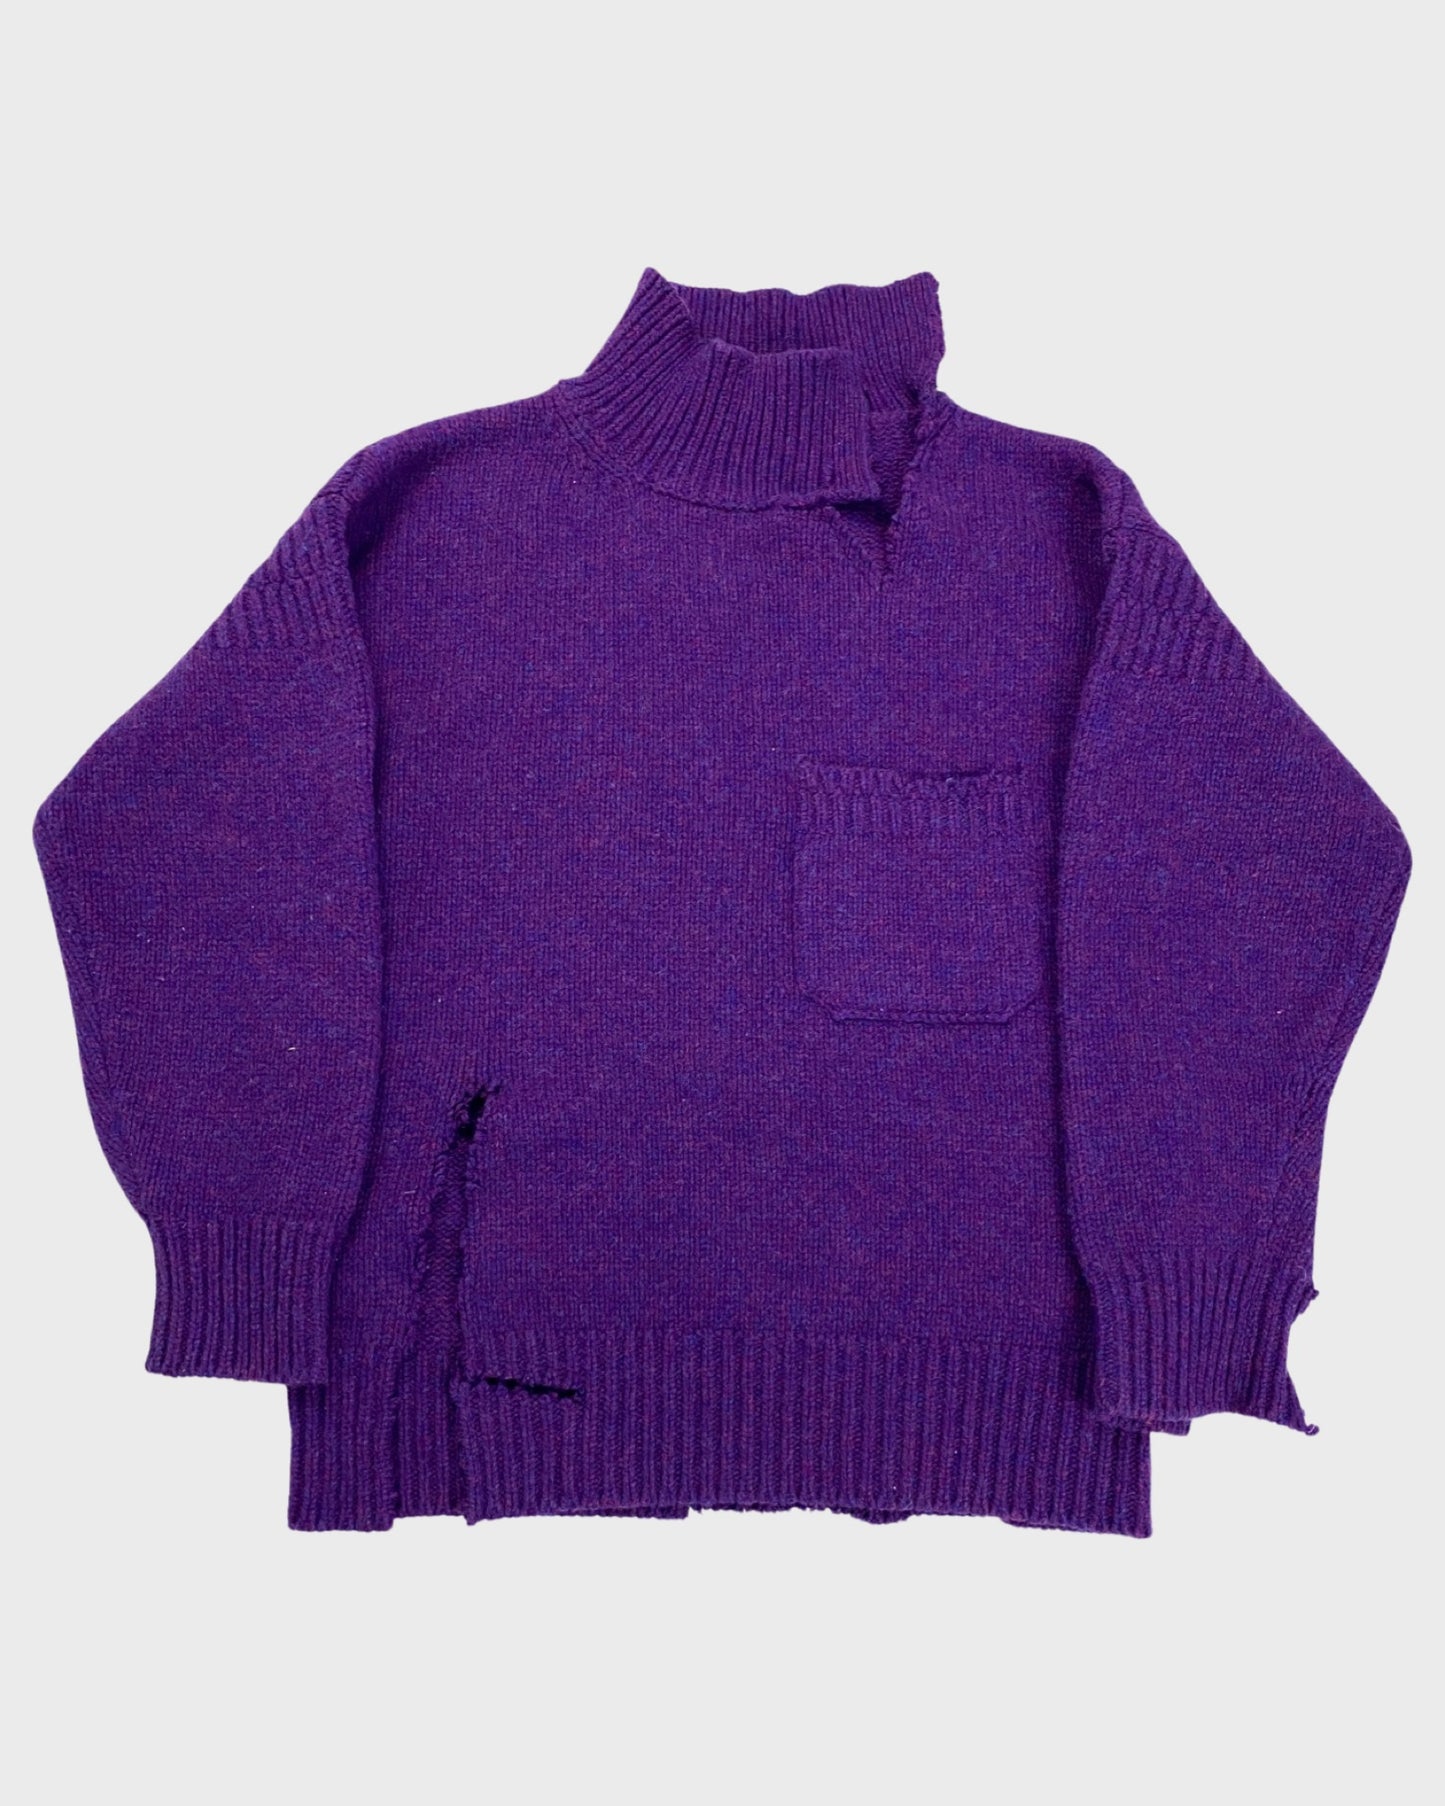 Marni distressed deconstructed sweater in purple SZ:46